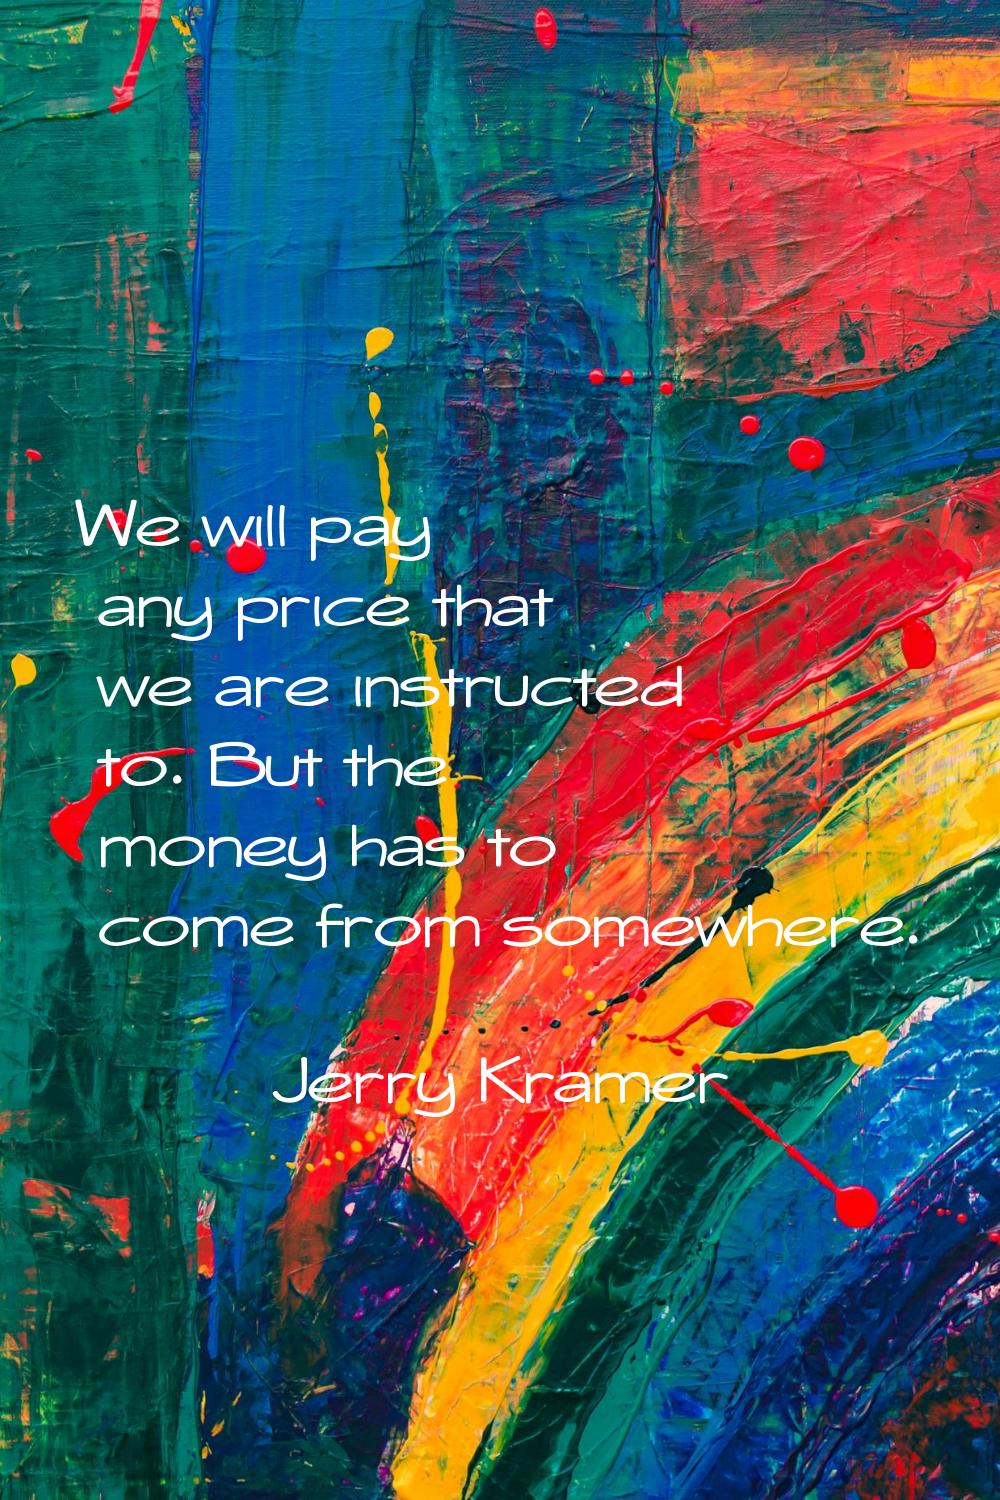 We will pay any price that we are instructed to. But the money has to come from somewhere.